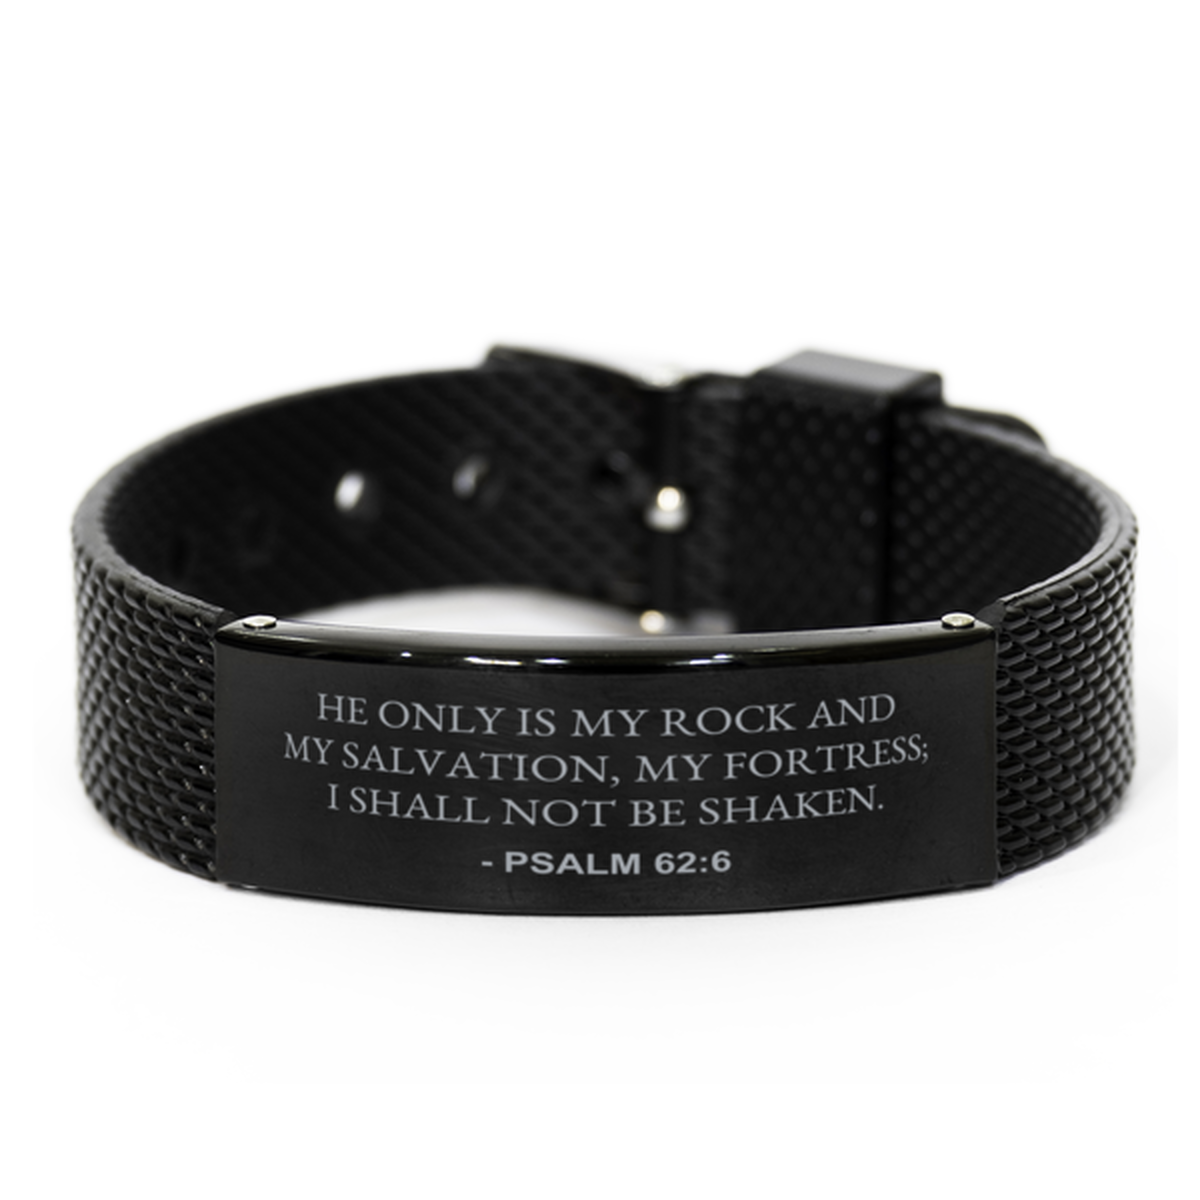 Christian Black Bracelet,, Psalm 62:6 He Only Is My Rock And My Salvation, My Fortress;, Motivational Bible Verse Gifts For Men Women